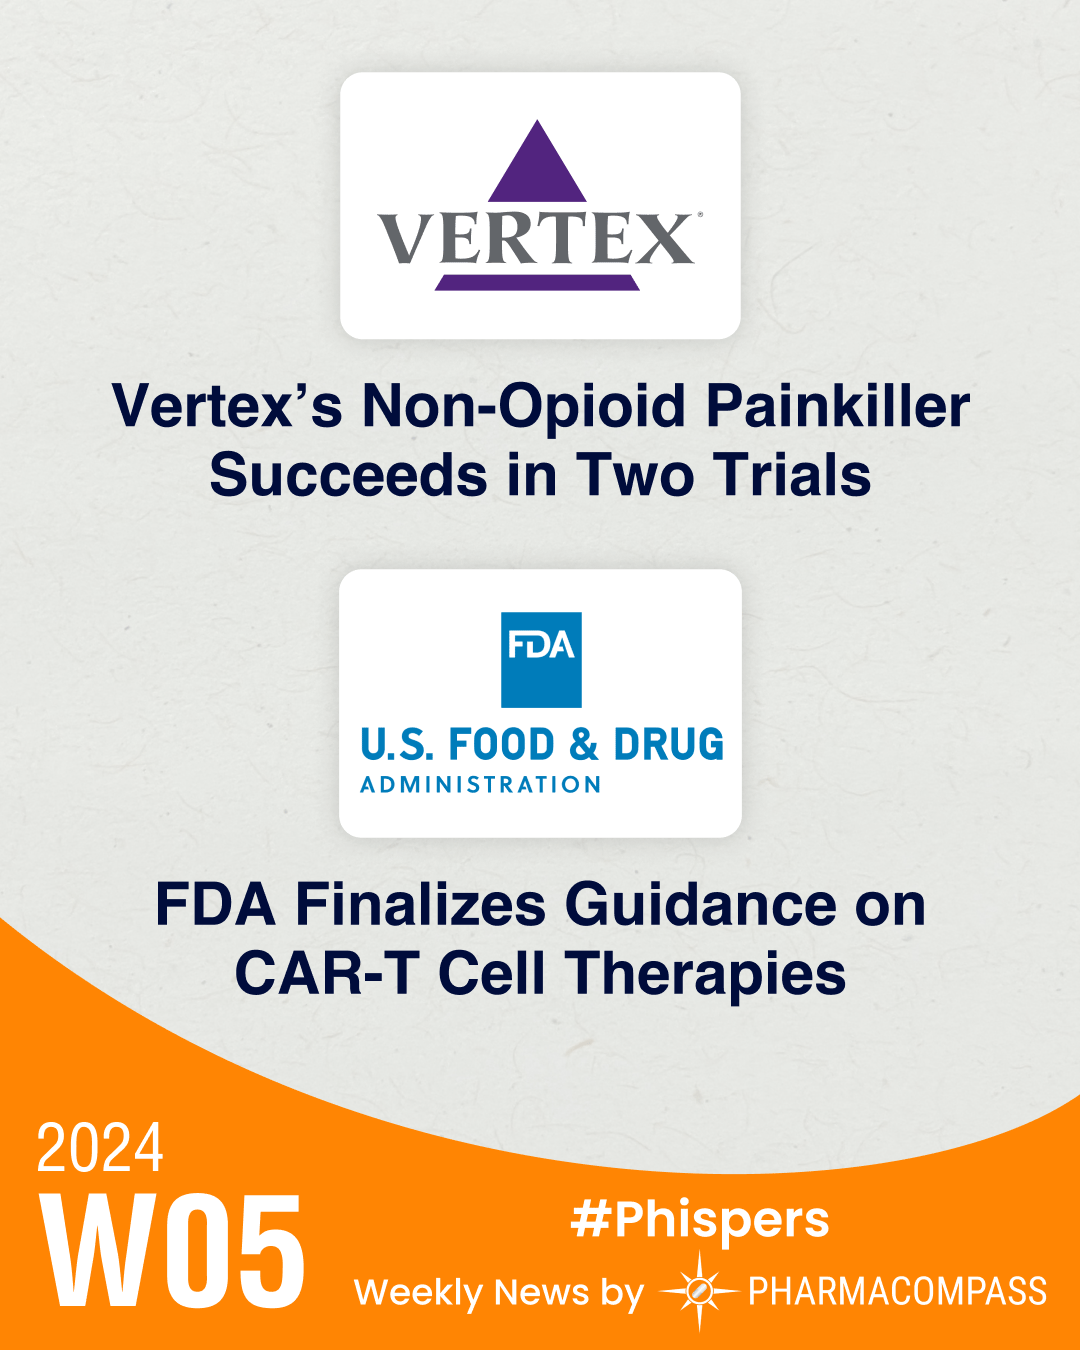 Vertex’s non-opioid painkiller succeeds in late-stage trials, FDA finalizes CAR-T guidance